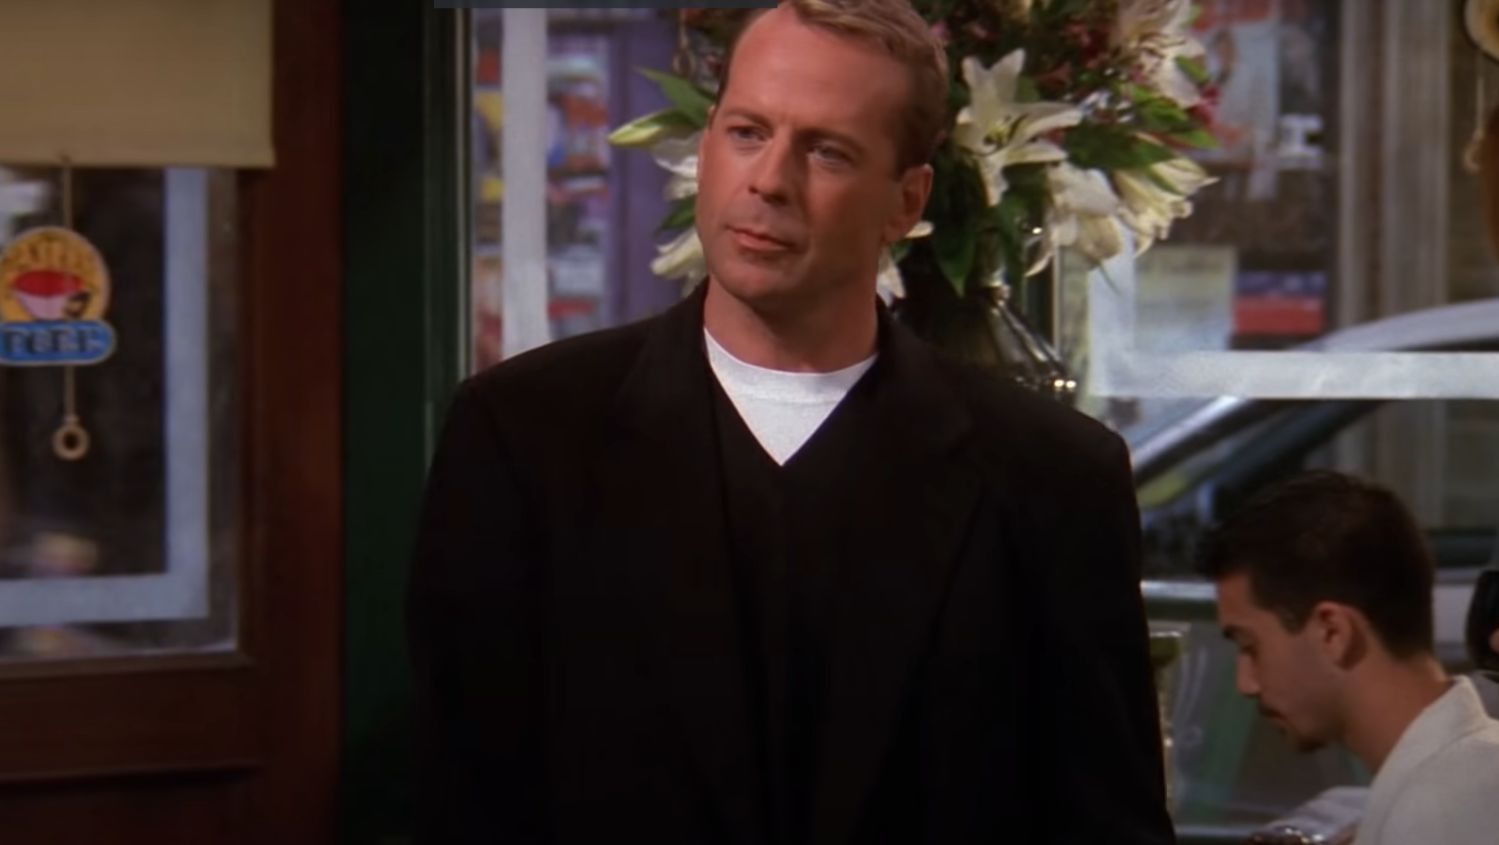 Bruce Willis in the TV show Friends